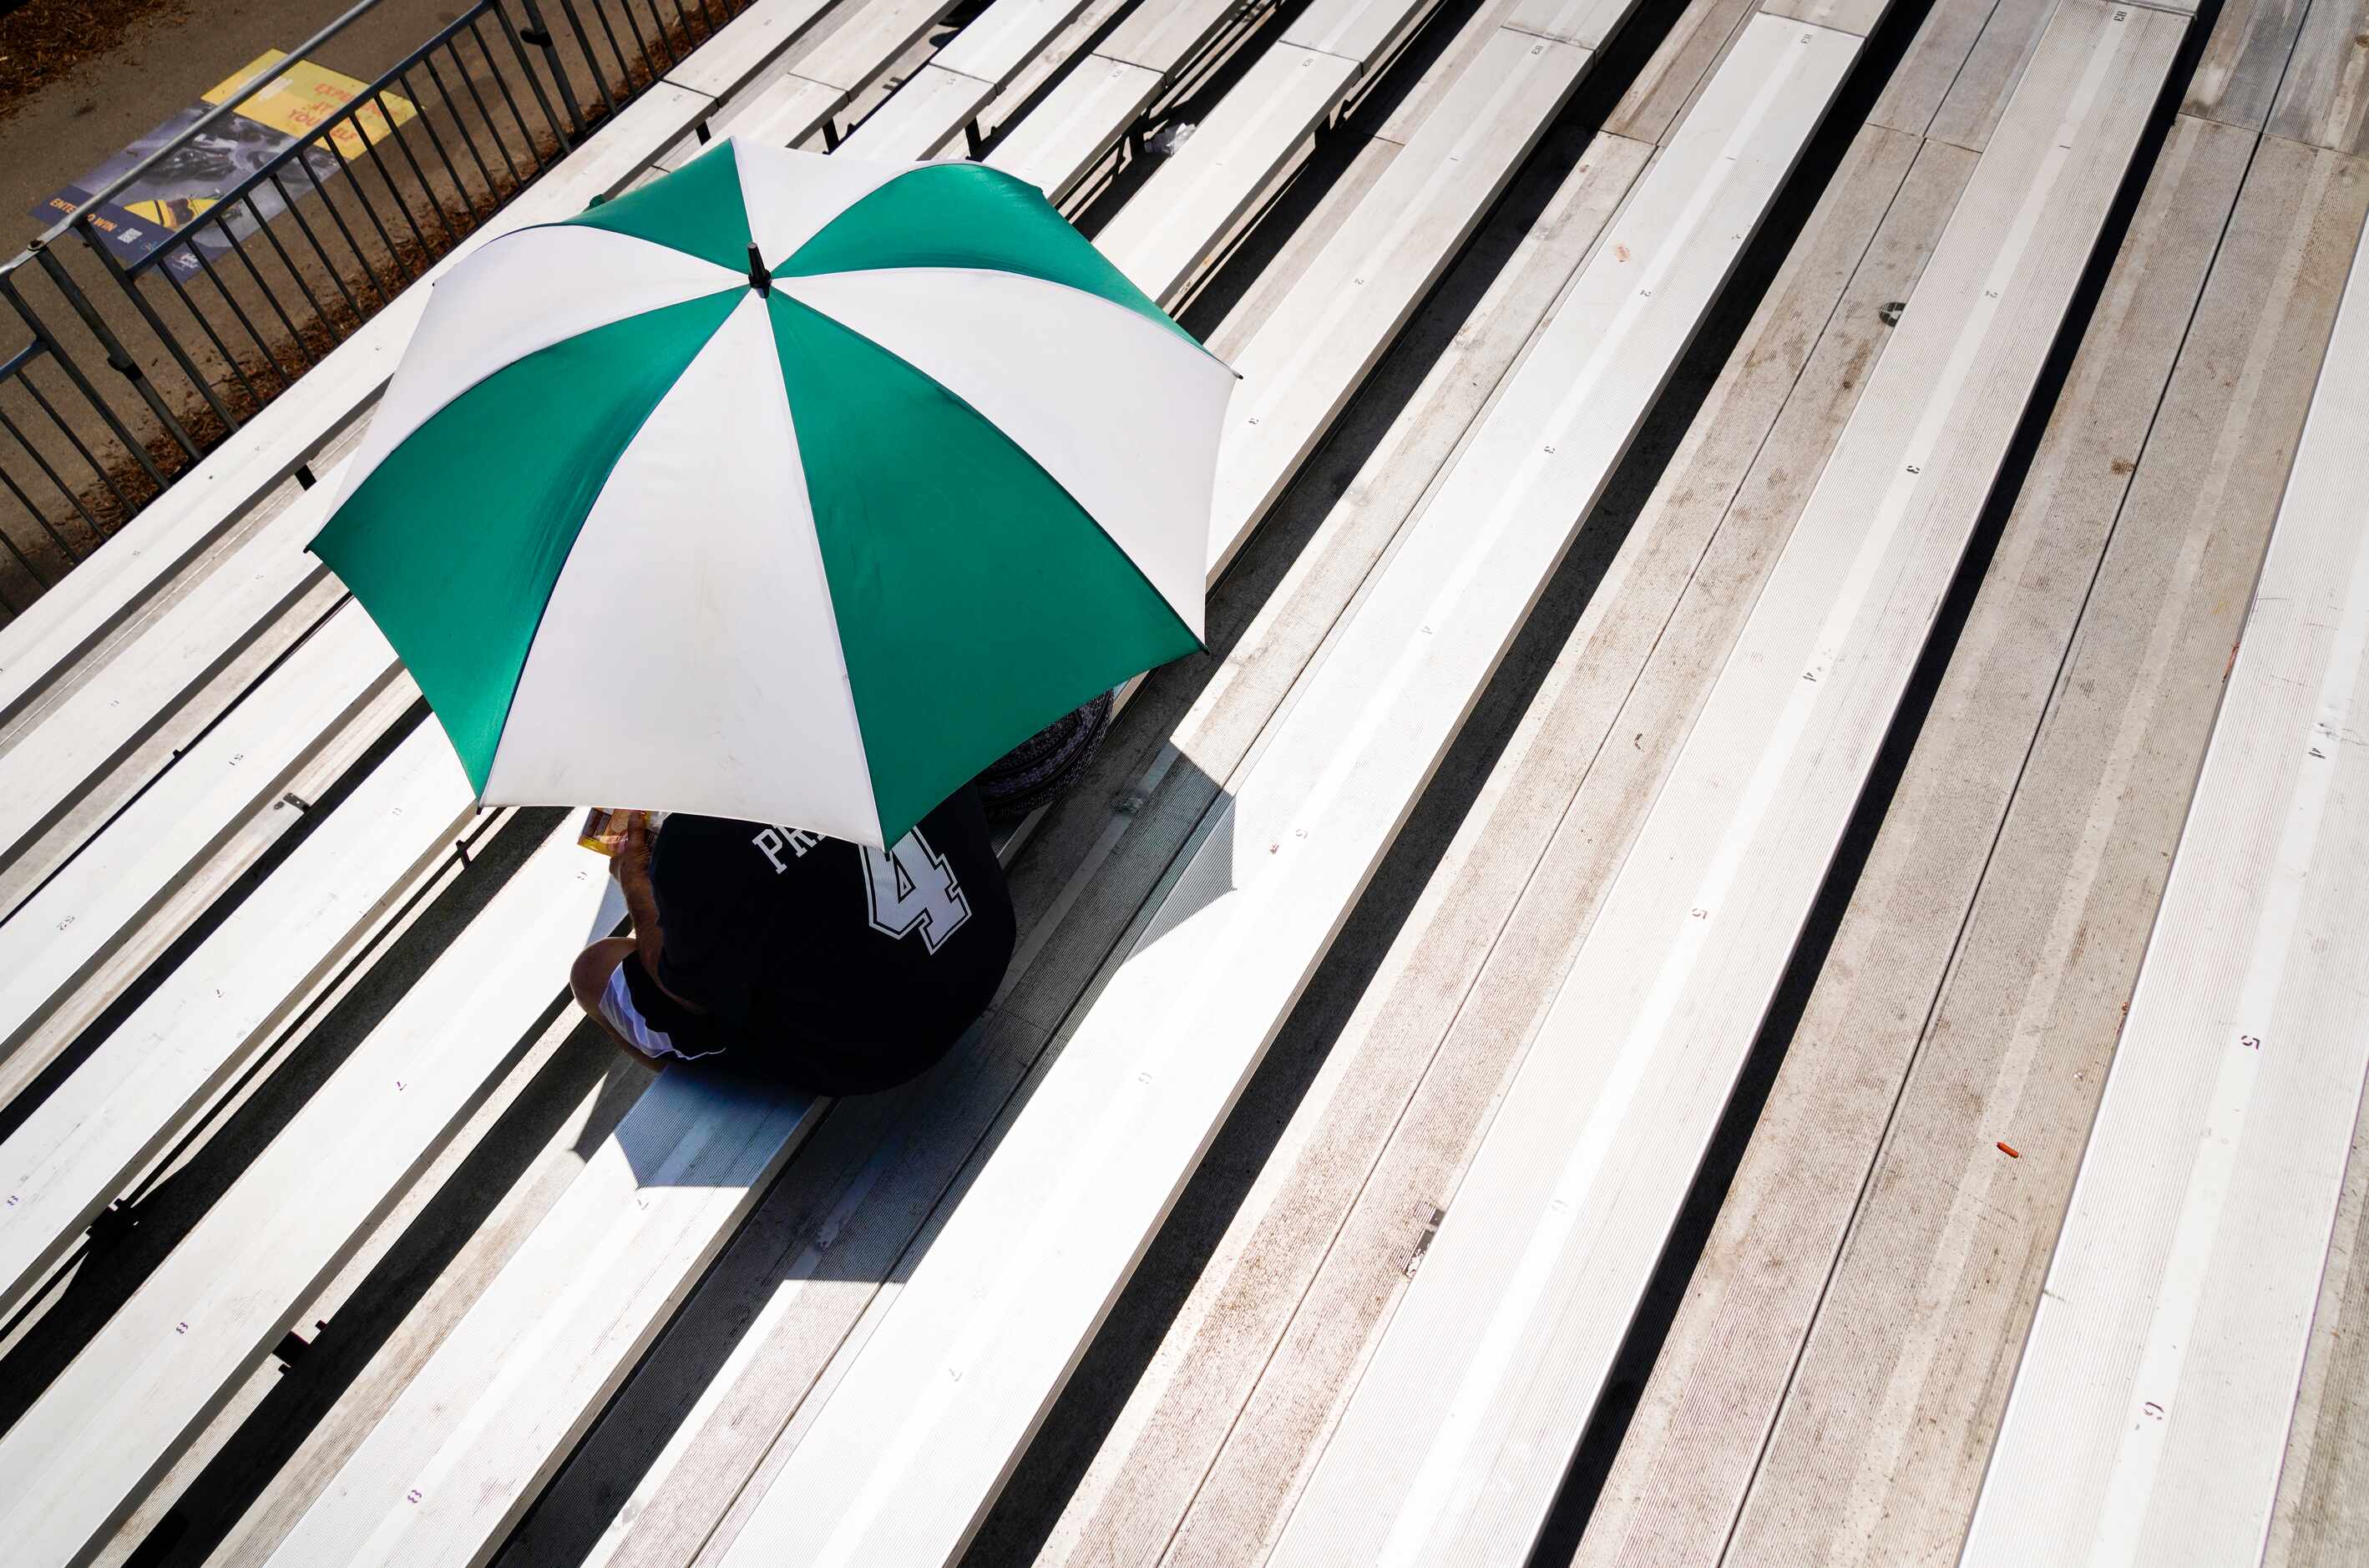 Dallas Cowboys fans find shade under an umbrella as they watch the team practice at training...